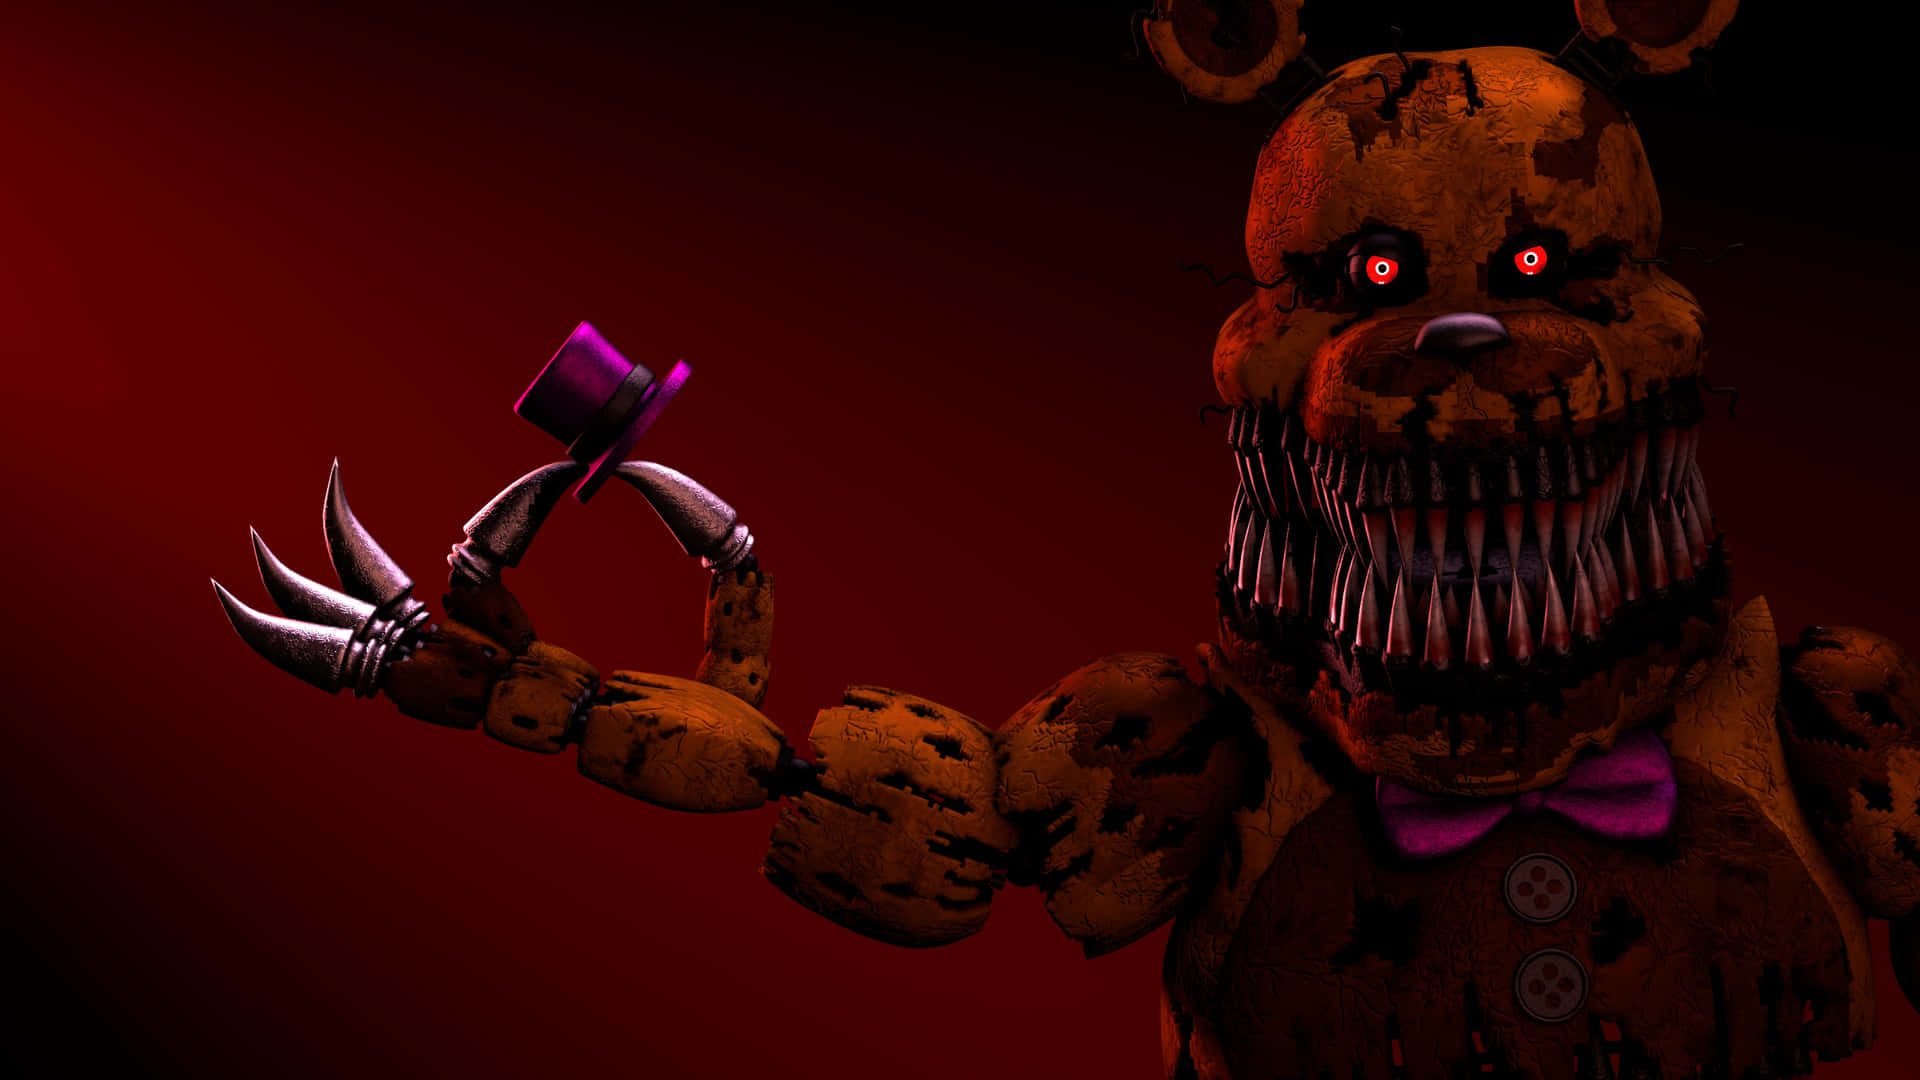 Five Nights At Freddys 4 Grinning Freddy Wallpaper